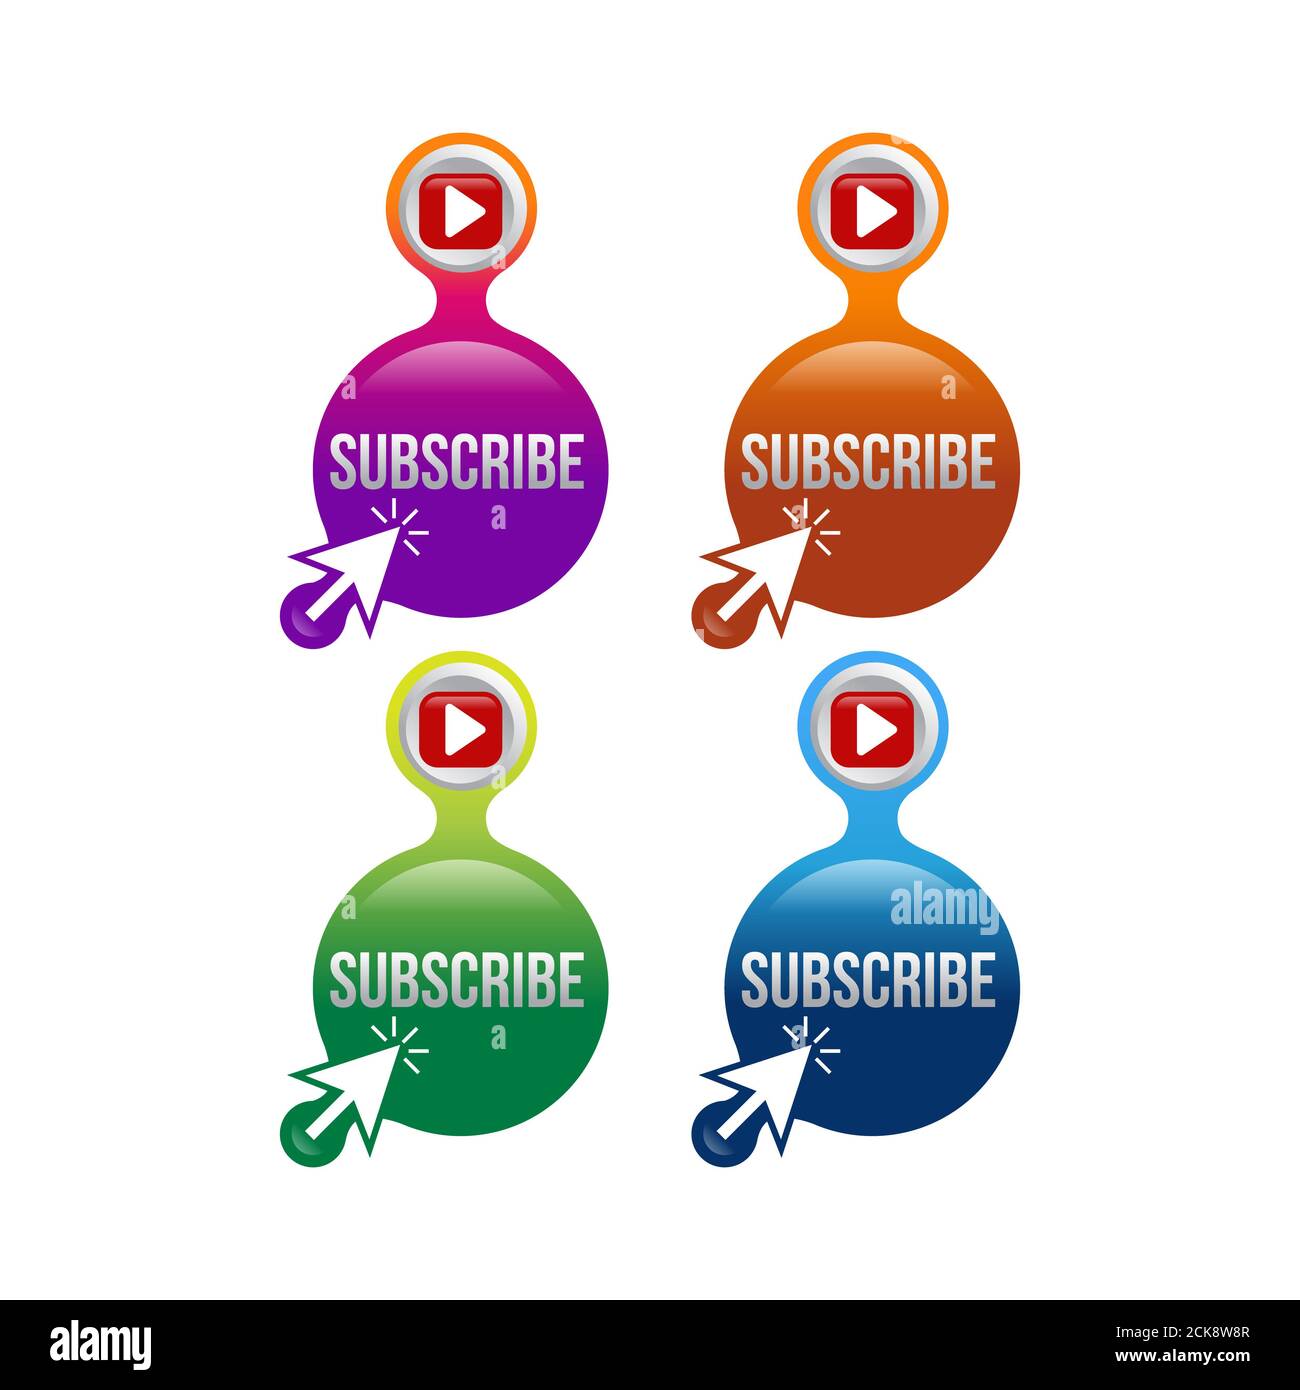 Subscribe button icon. Vector illustration. Business concept subscribe pictogram. Stock Photo